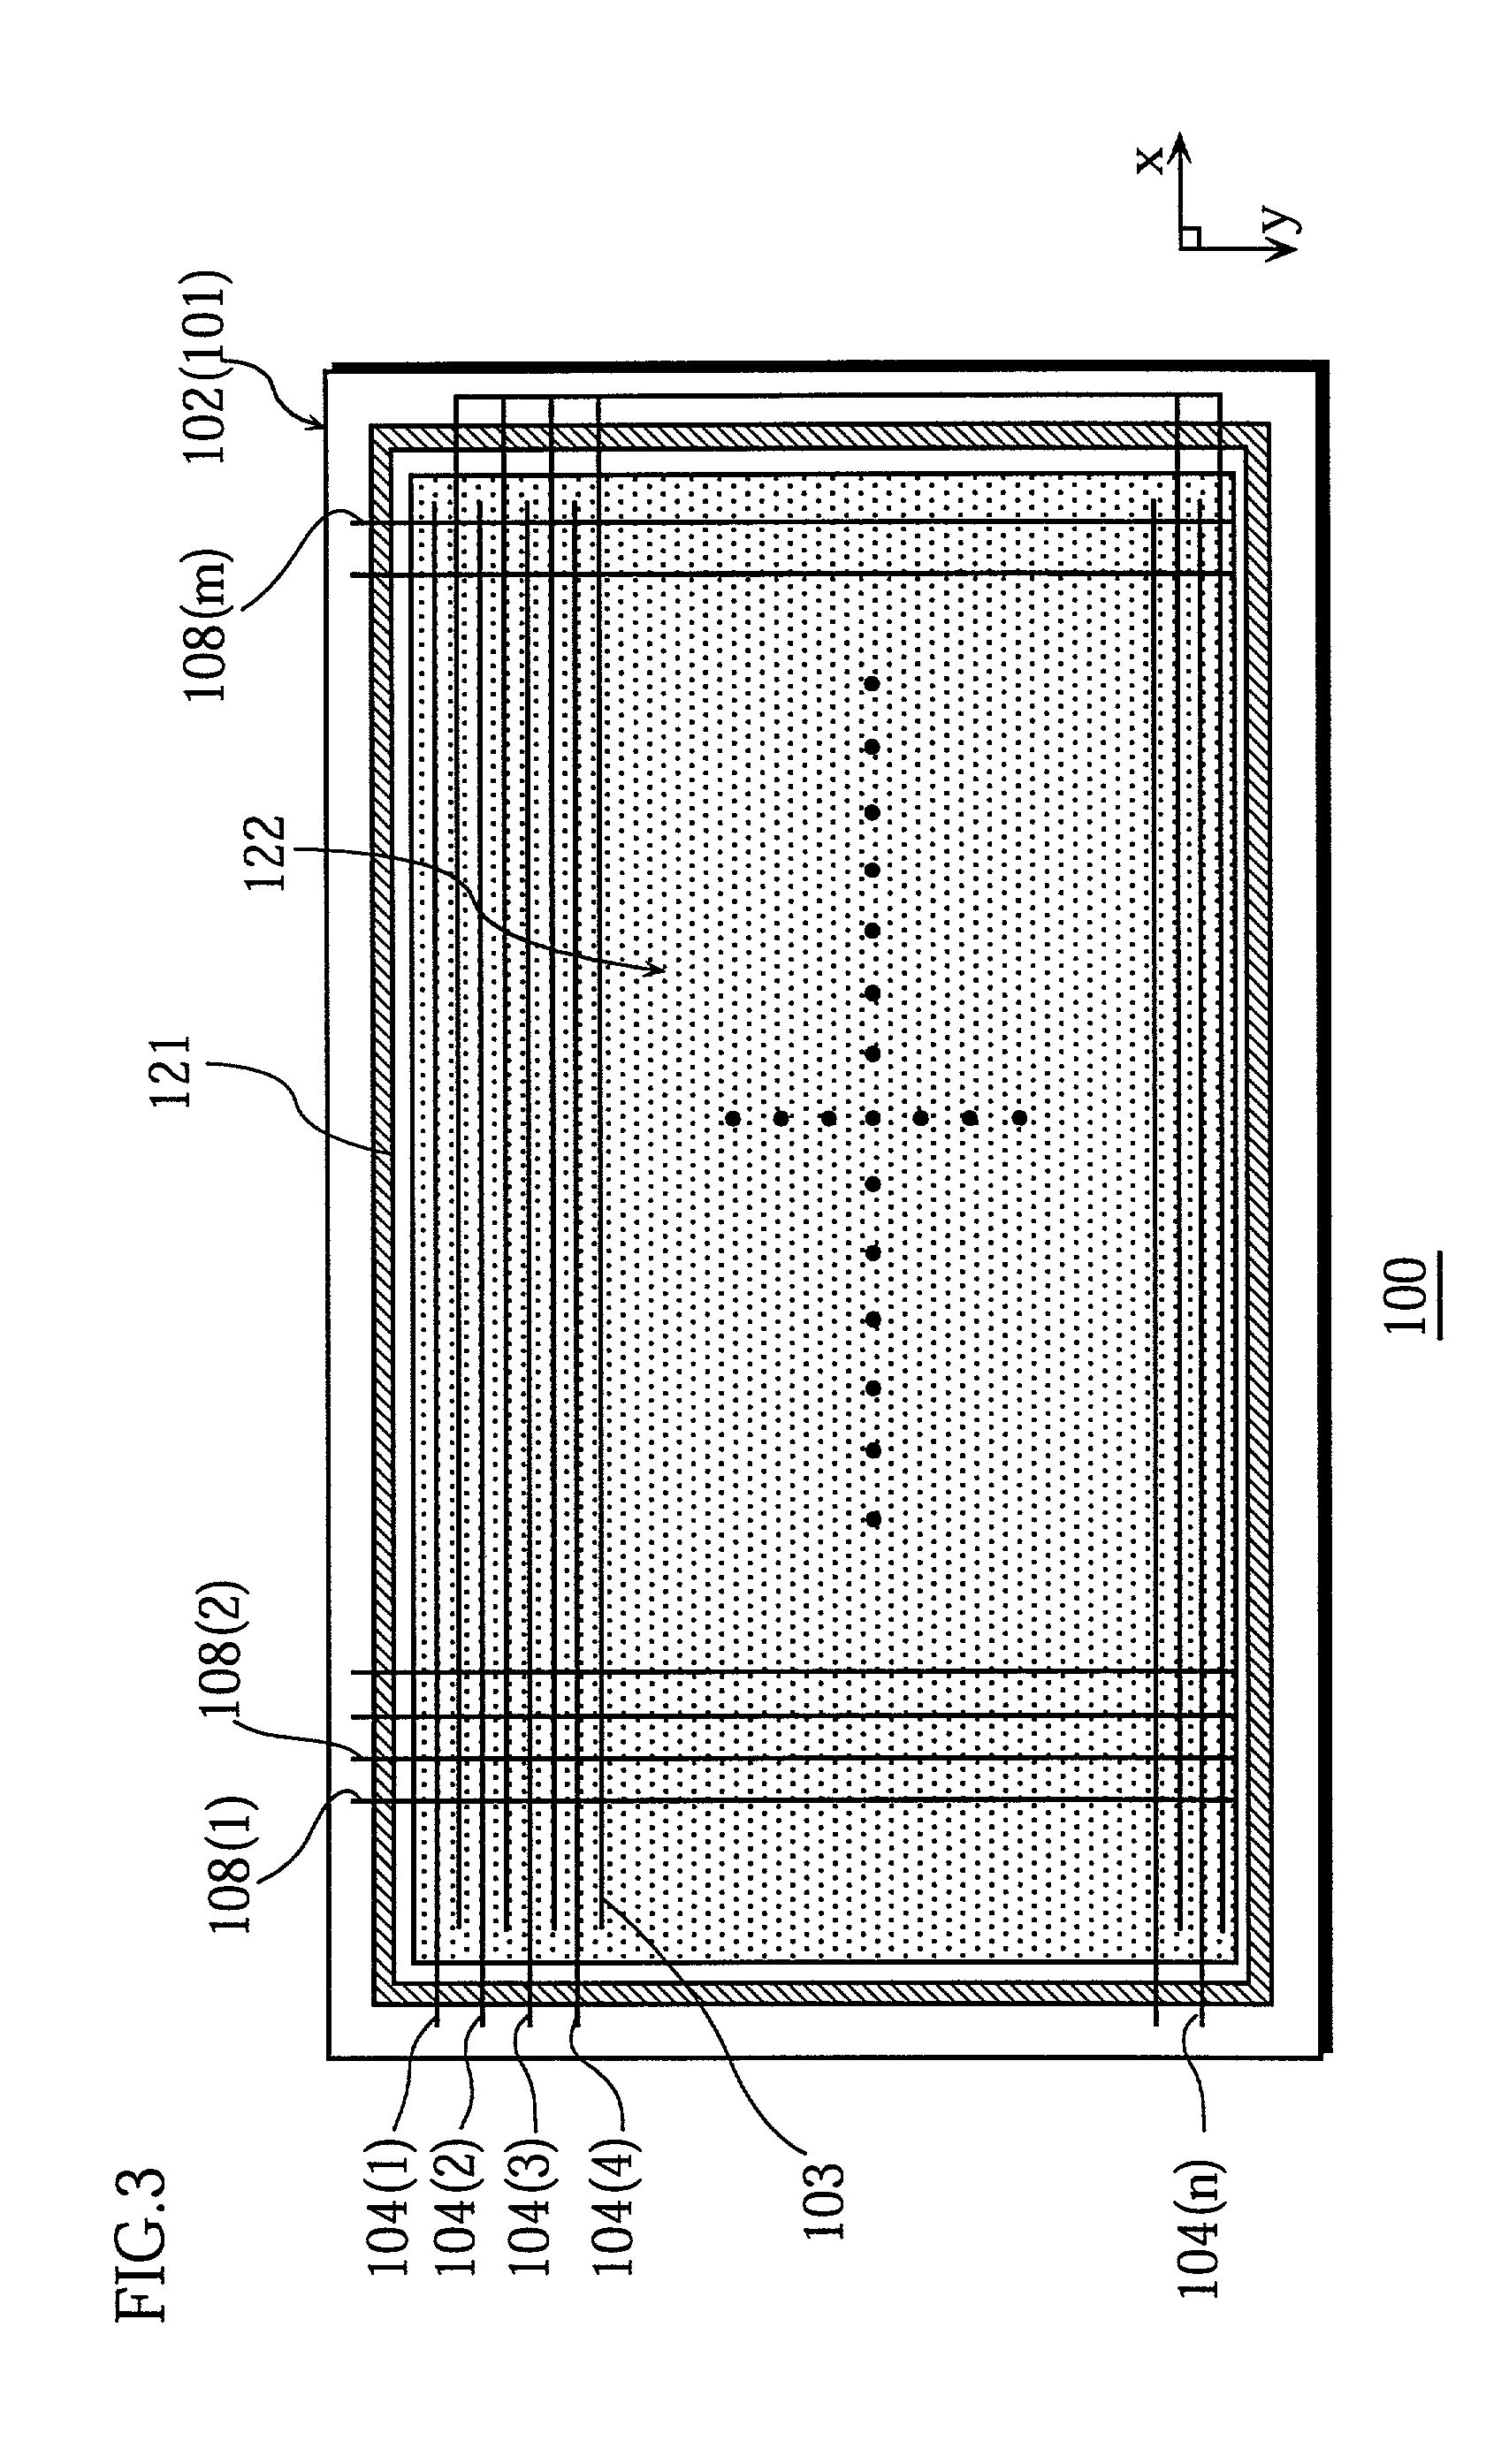 Surface-discharge type display device with reduced power consumption